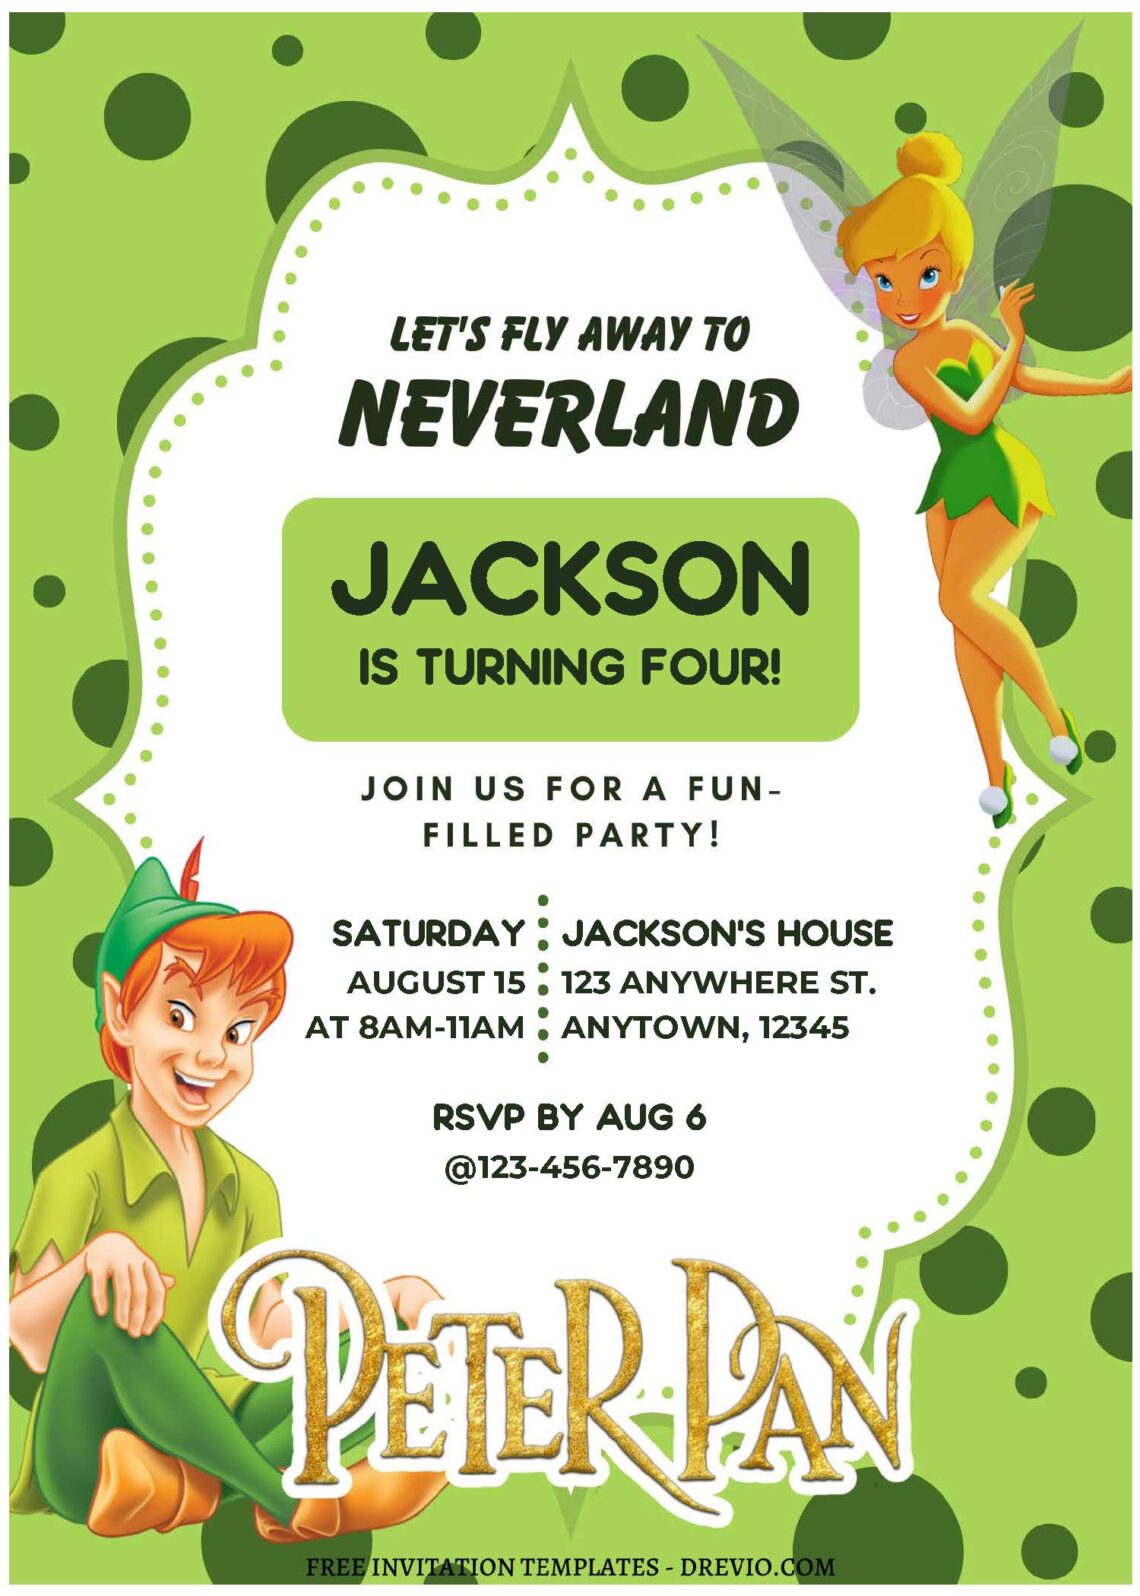 (Free Editable PDF) Fly To Neverland Peter Pan & Wendy Birthday Invitation Templates A